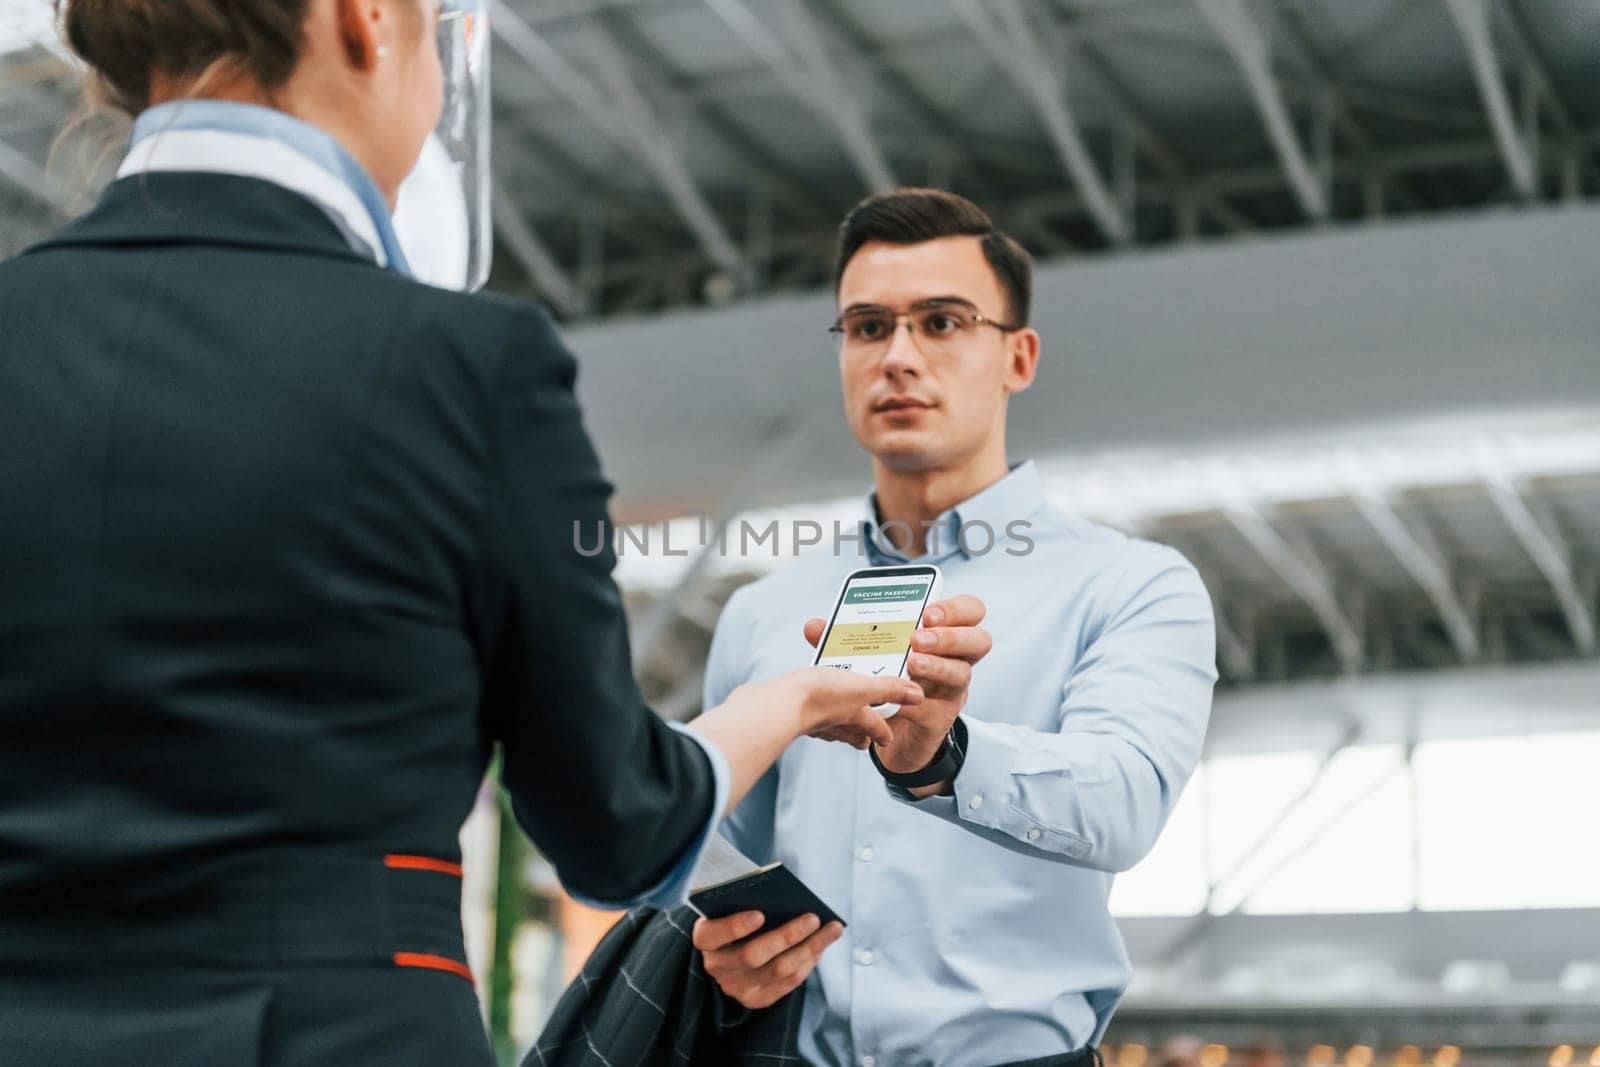 Man showing vaccination certificate. Young businessman in formal clothes is in the airport at daytime.